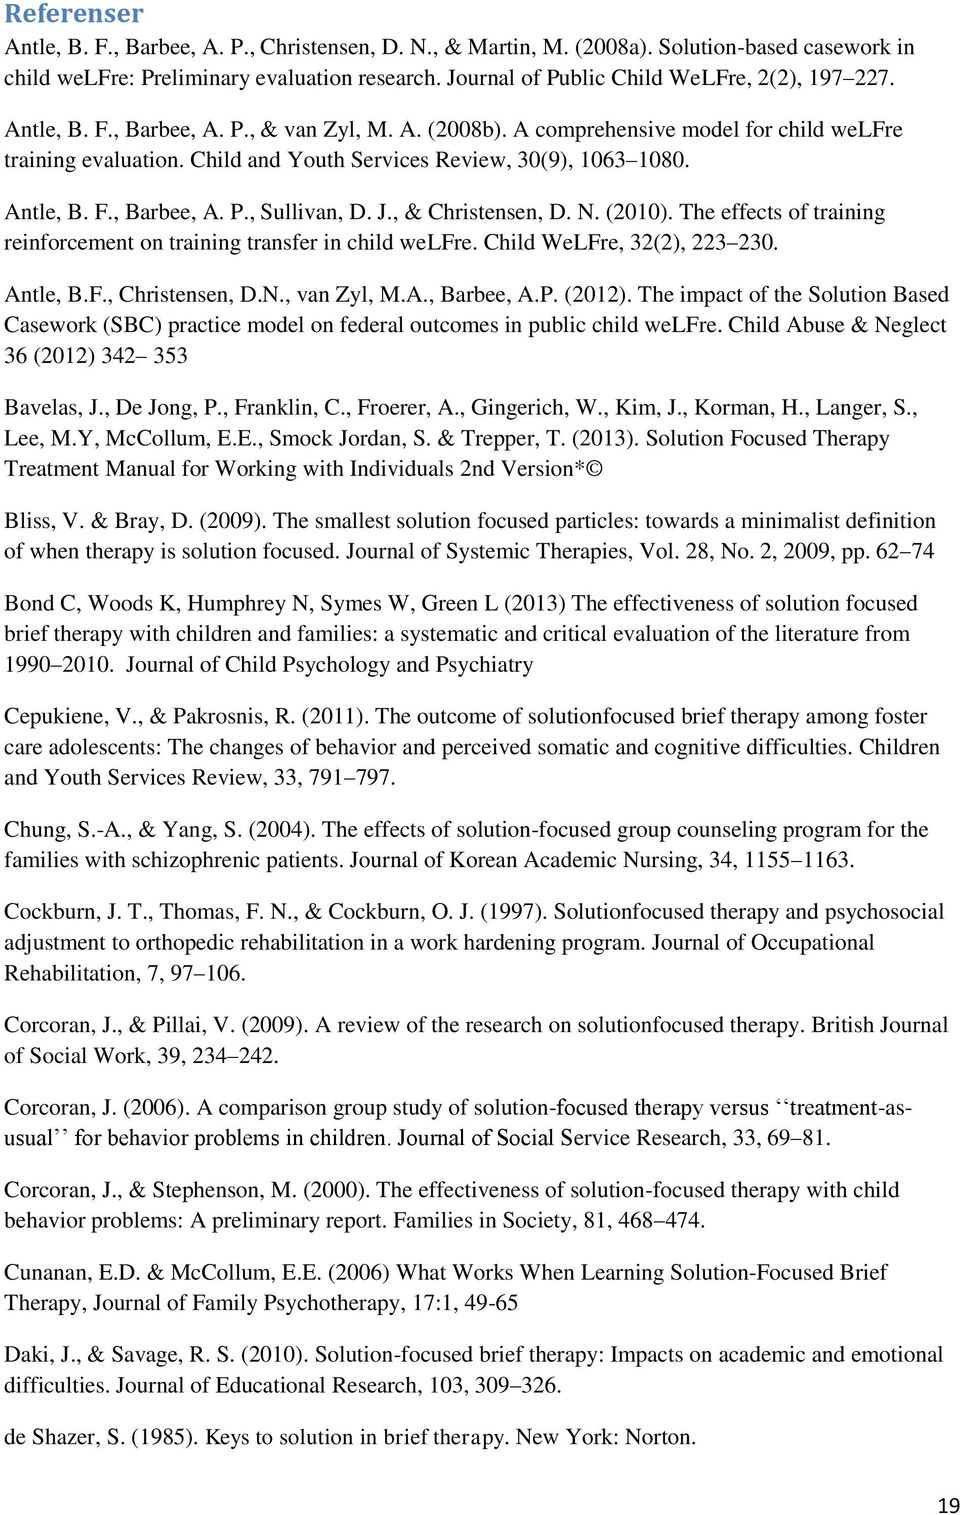 Child and Youth Services Review, 30(9), 1063 1080. Antle, B. F., Barbee, A. P., Sullivan, D. J., & Christensen, D. N. (2010).